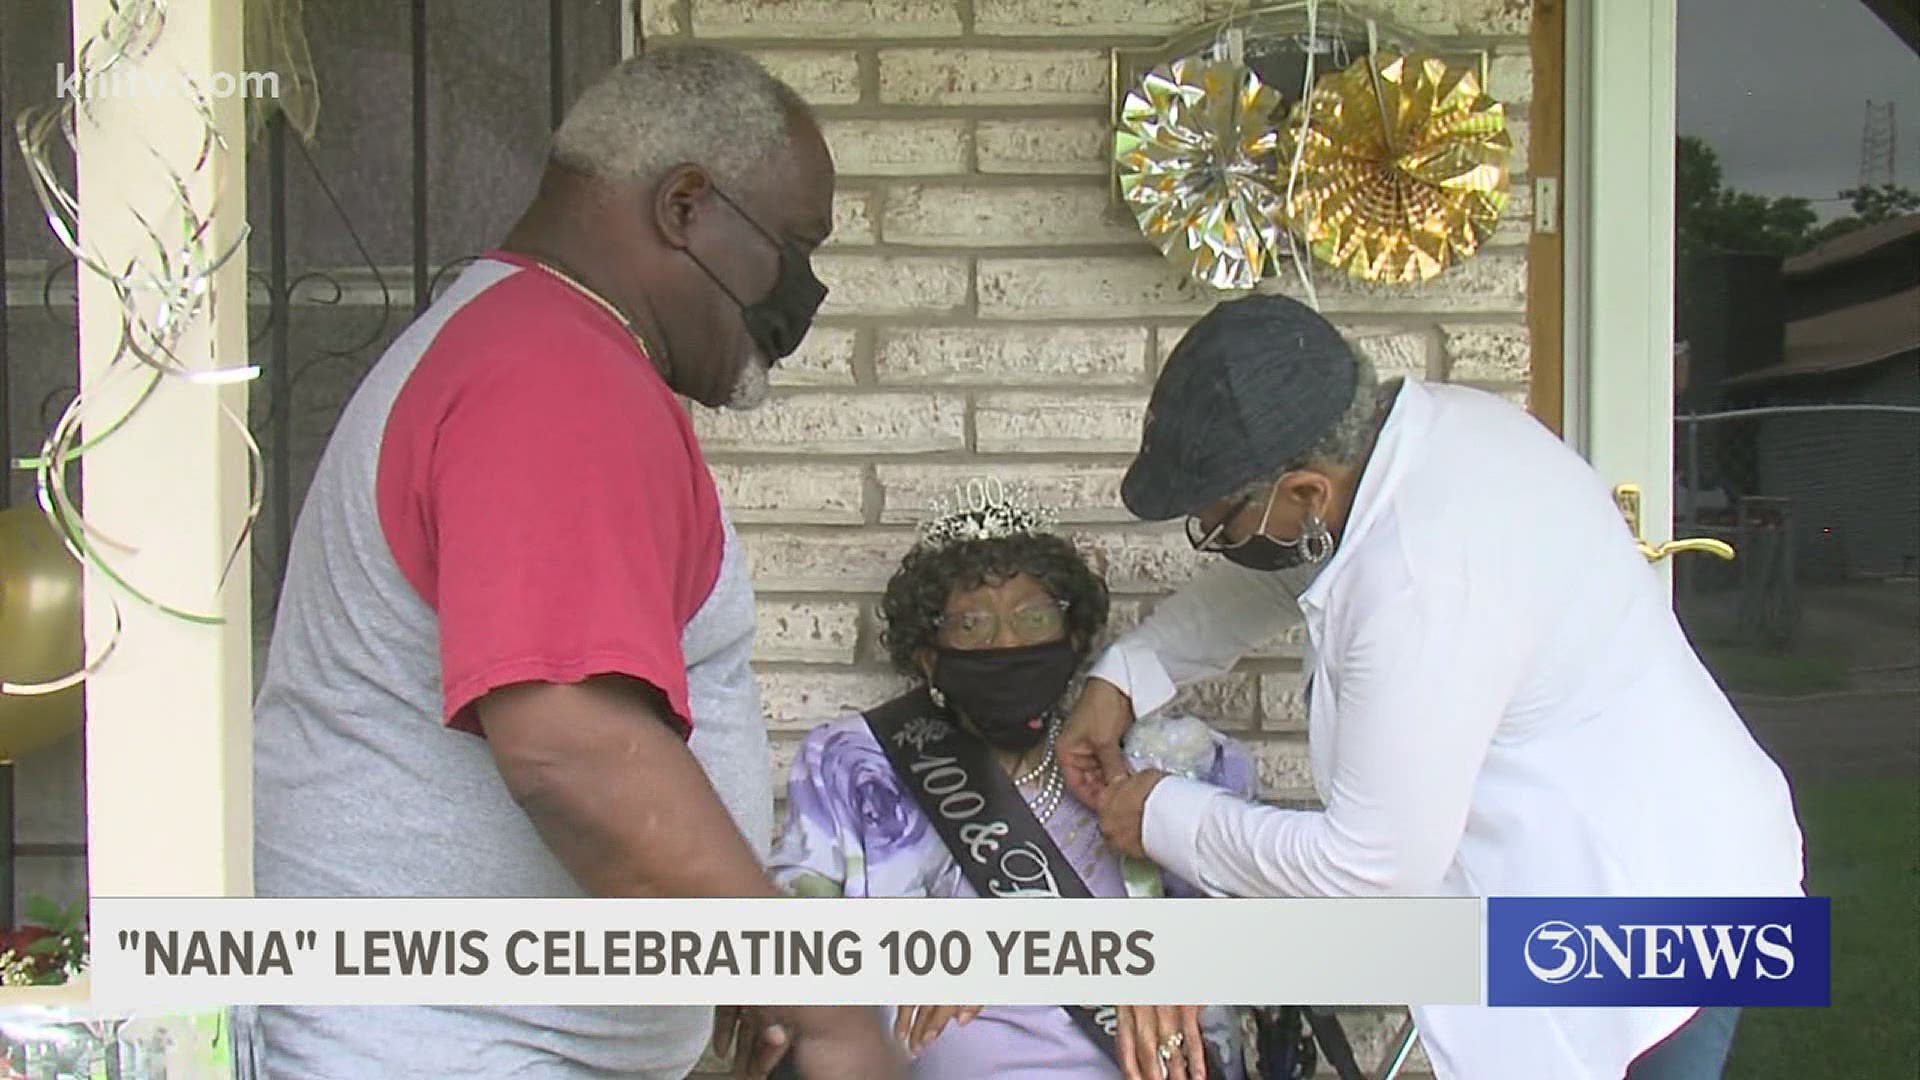 Saturday's century celebration was not only in honor of Blanche Lewis's birthday, but also a celebration of the impact she has had on the community.